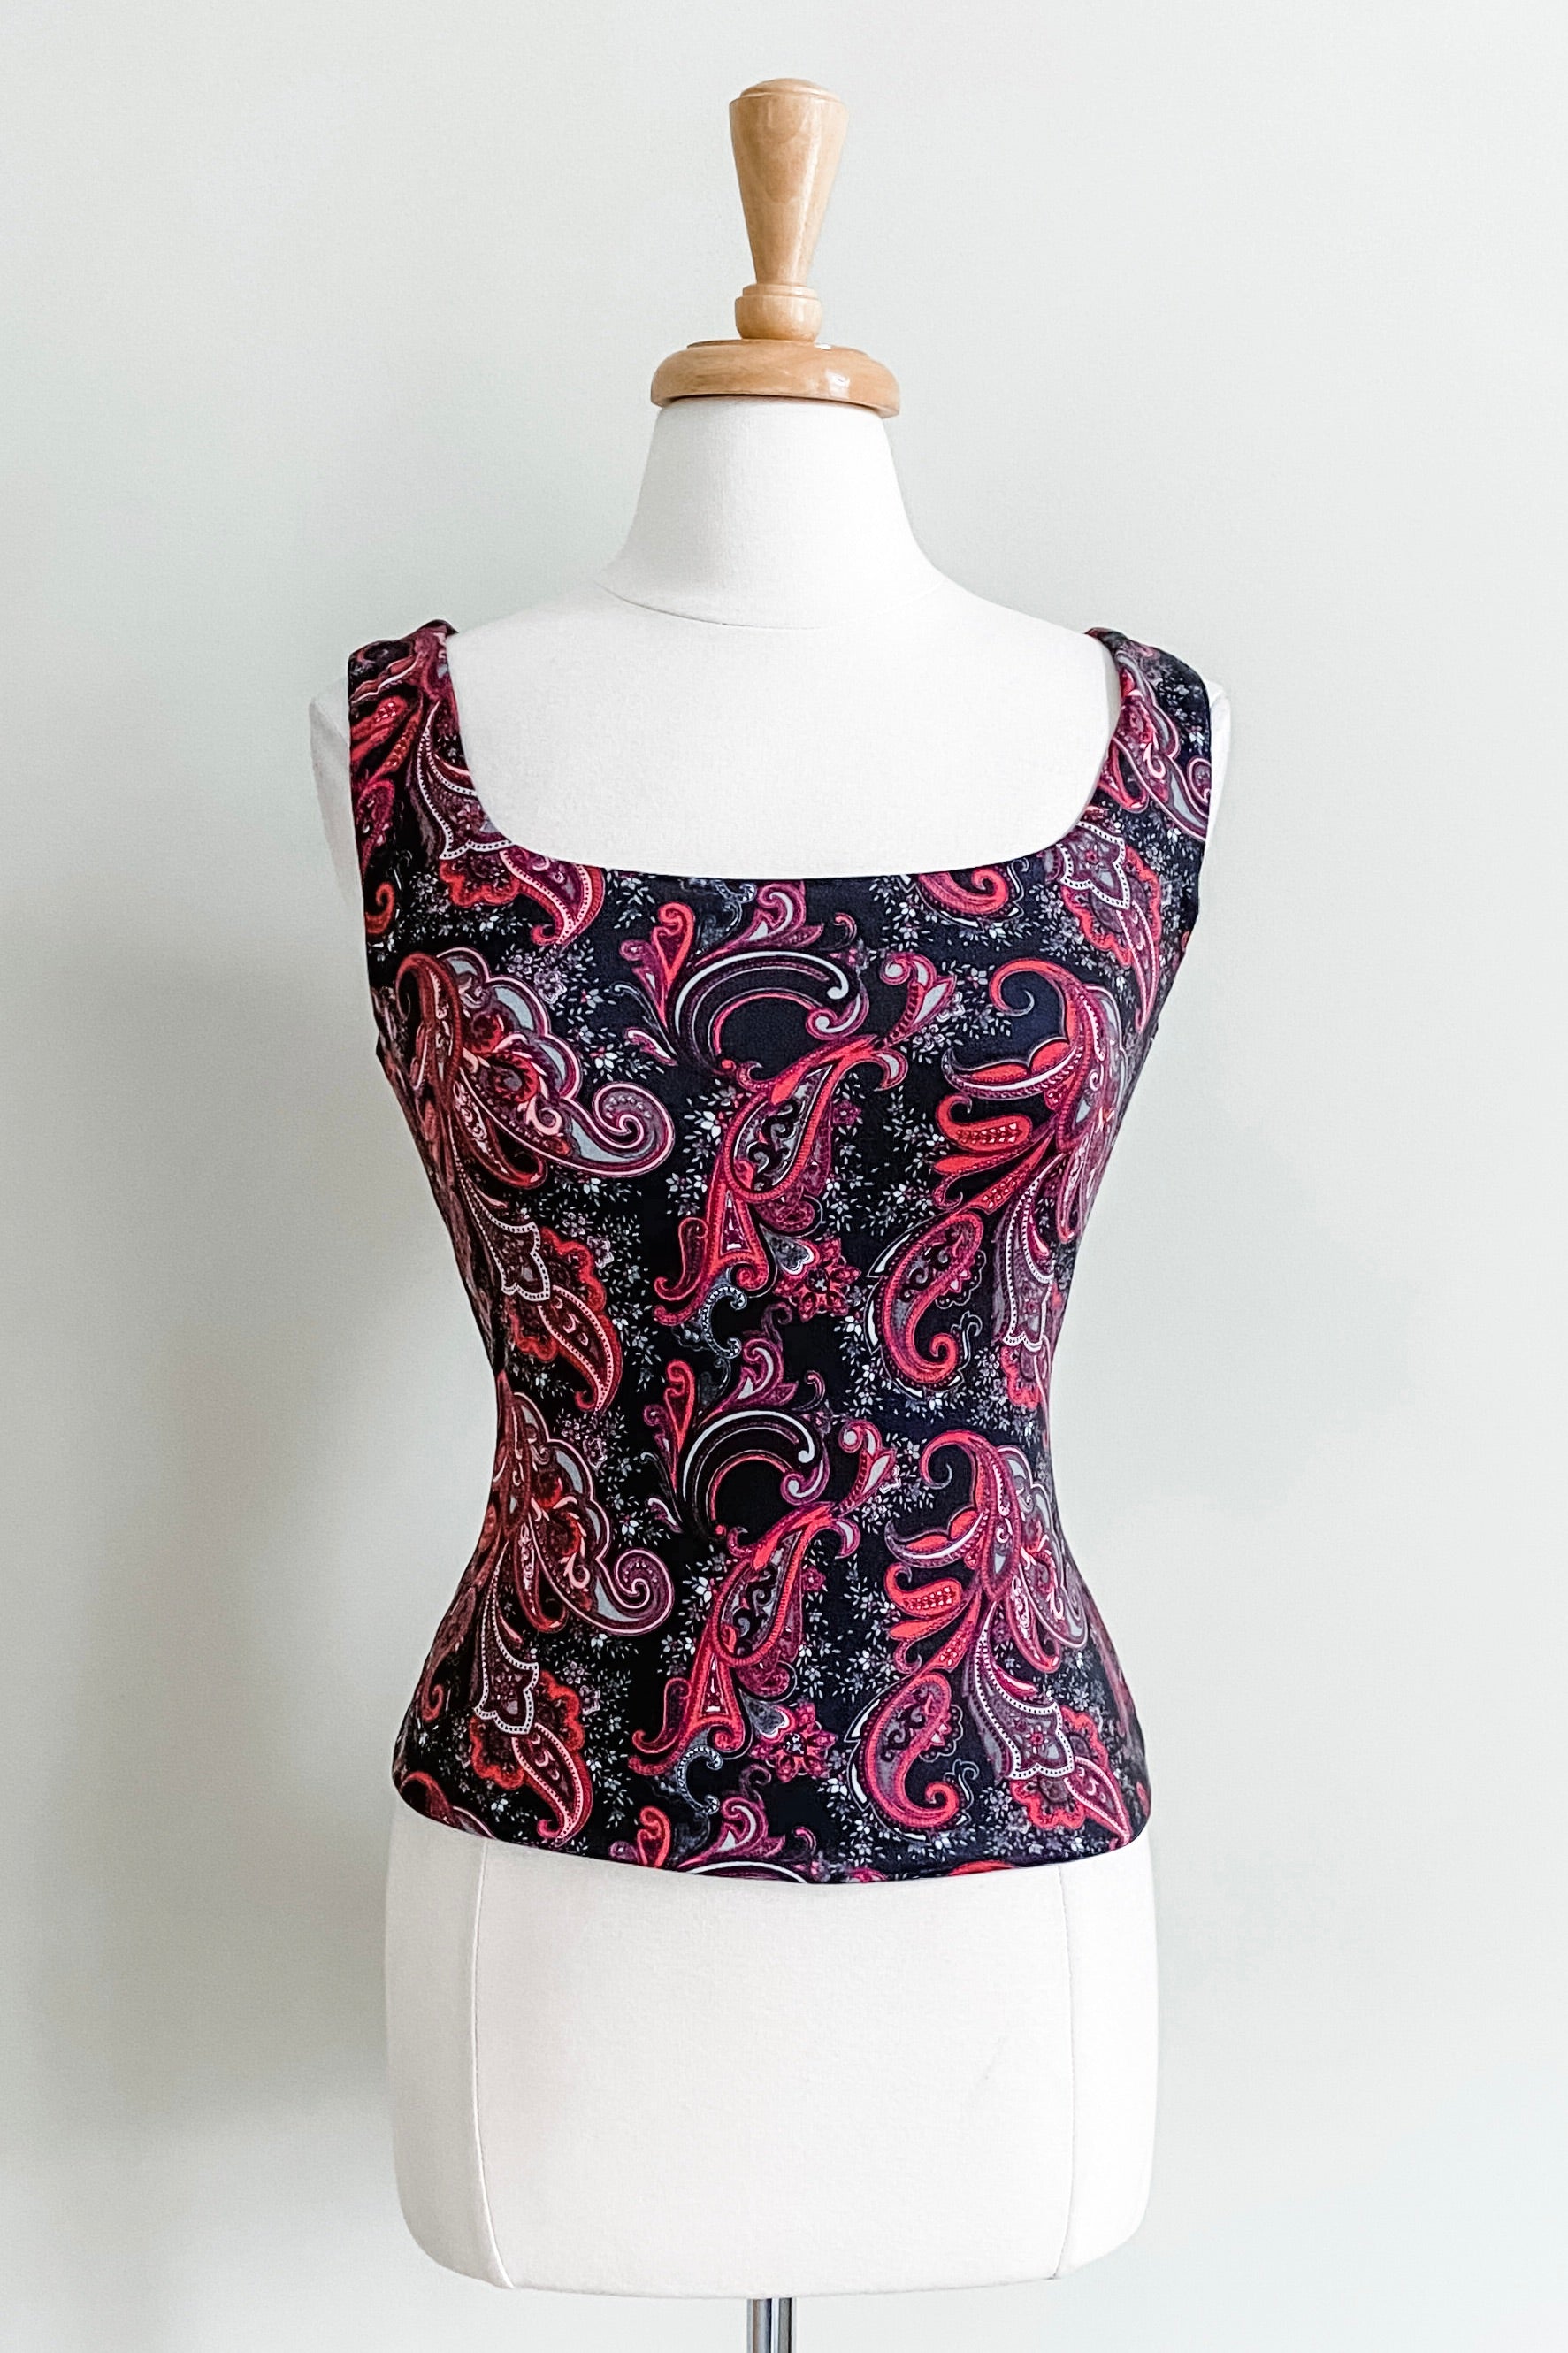 Diane Kroe Matching Reversible Bralette (Wine Paisley) - The Classic Capsule Collection